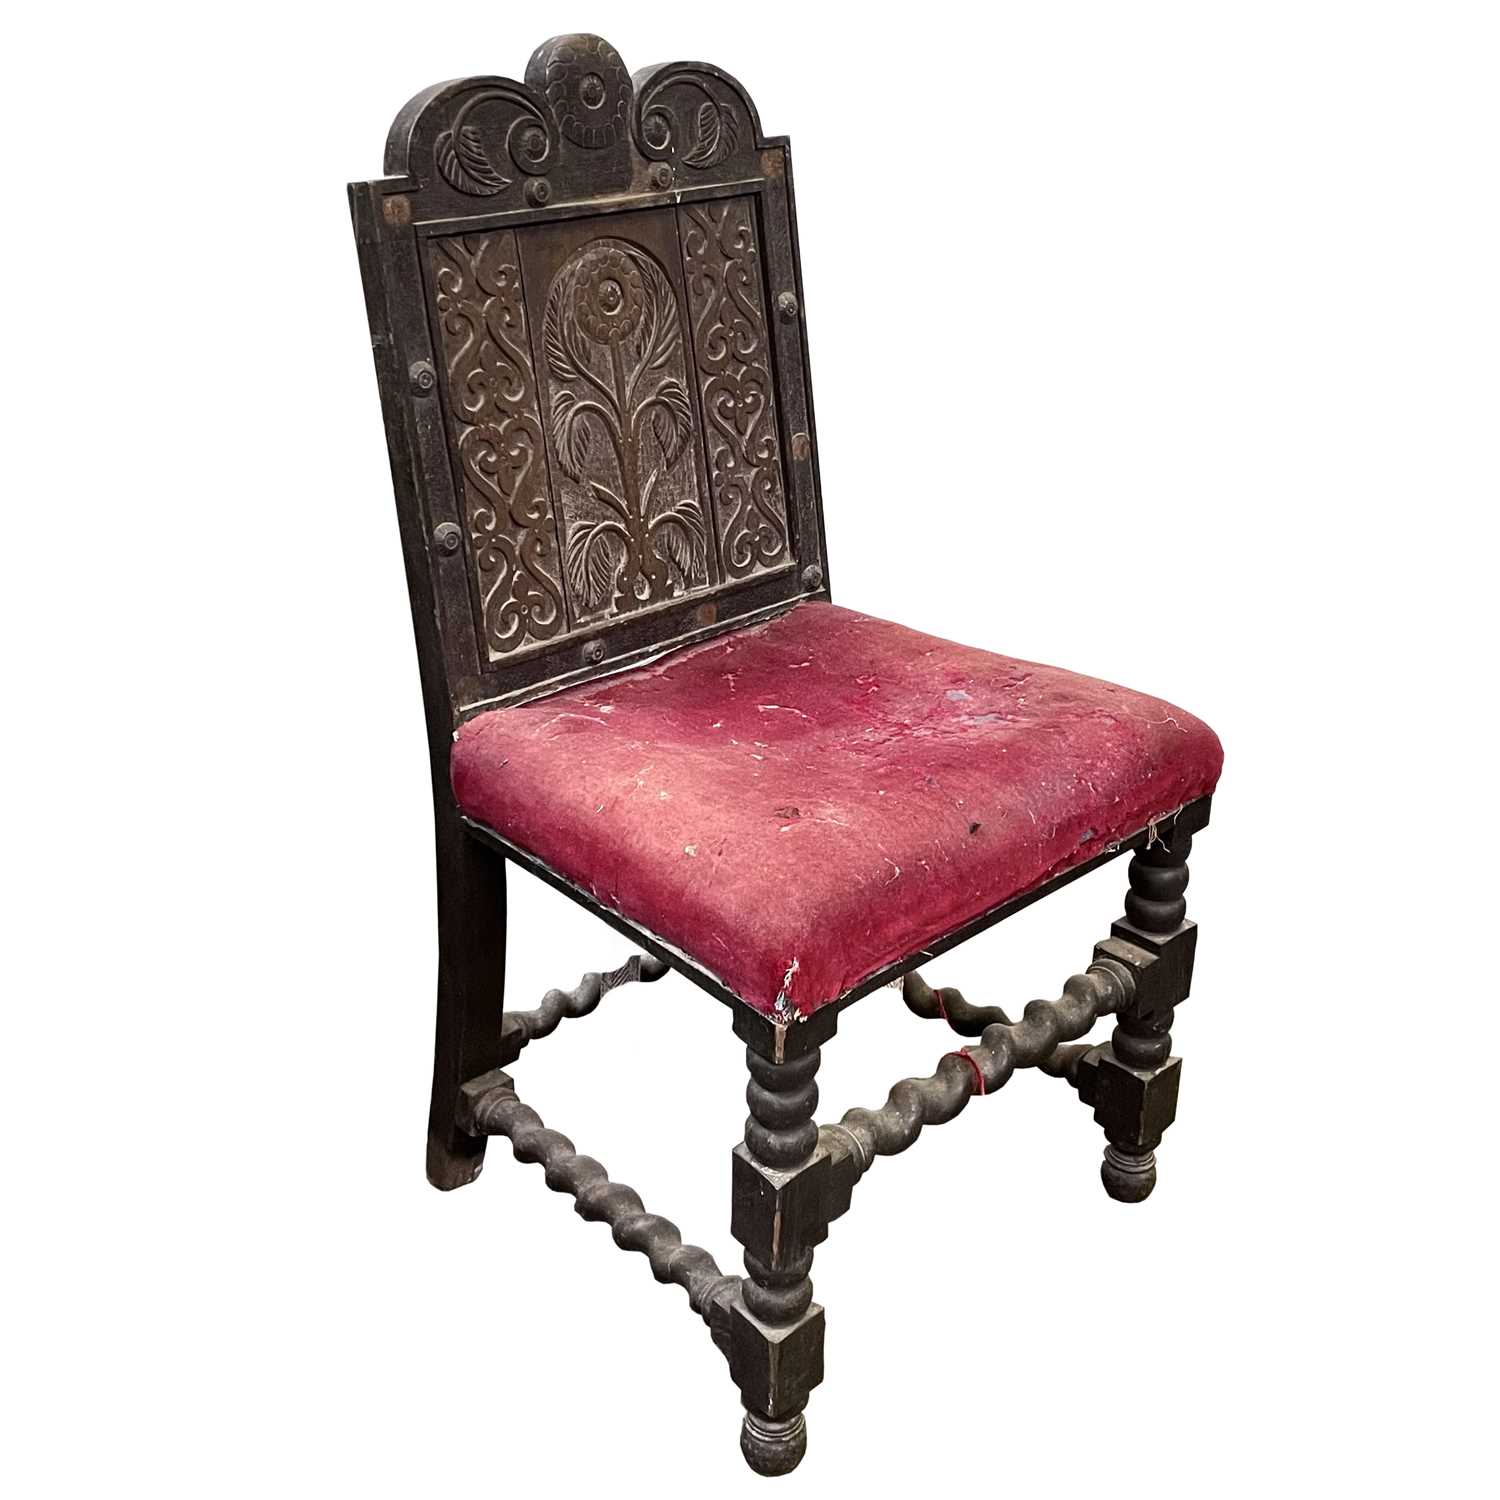 Lot 18 - A carved oak side chair, early 18th century.